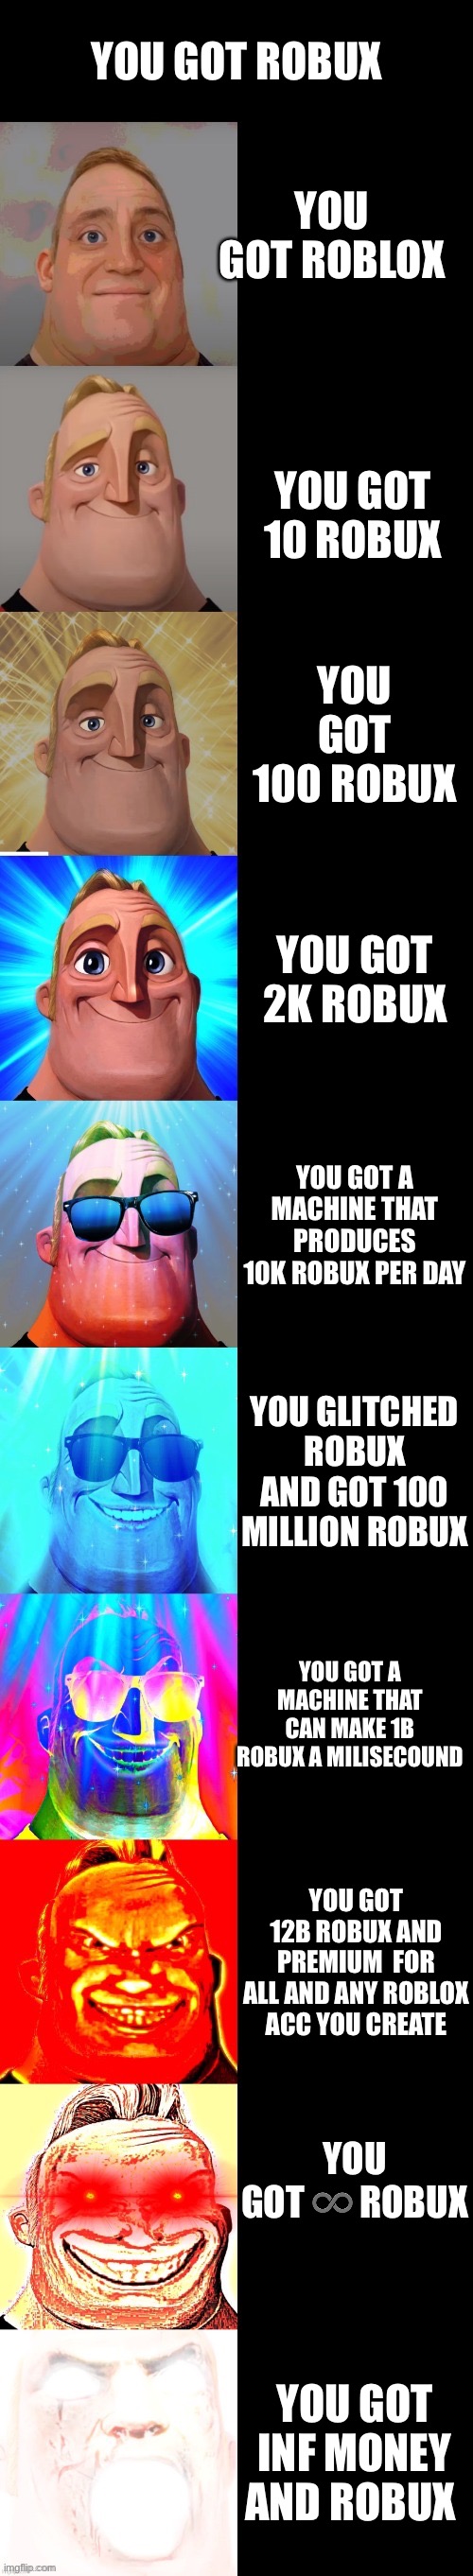 When You Get Robux Good Ending | YOU GOT ROBUX; YOU GOT ROBLOX; YOU GOT 10 ROBUX; YOU GOT 100 ROBUX; YOU GOT 2K ROBUX; YOU GOT A MACHINE THAT PRODUCES 10K ROBUX PER DAY; YOU GLITCHED ROBUX AND GOT 100 MILLION ROBUX; YOU GOT A MACHINE THAT CAN MAKE 1B ROBUX A MILISECOUND; YOU GOT 12B ROBUX AND PREMIUM  FOR ALL AND ANY ROBLOX ACC YOU CREATE; YOU GOT ♾ ROBUX; YOU GOT INF MONEY AND ROBUX | image tagged in mr incredible becoming canny | made w/ Imgflip meme maker